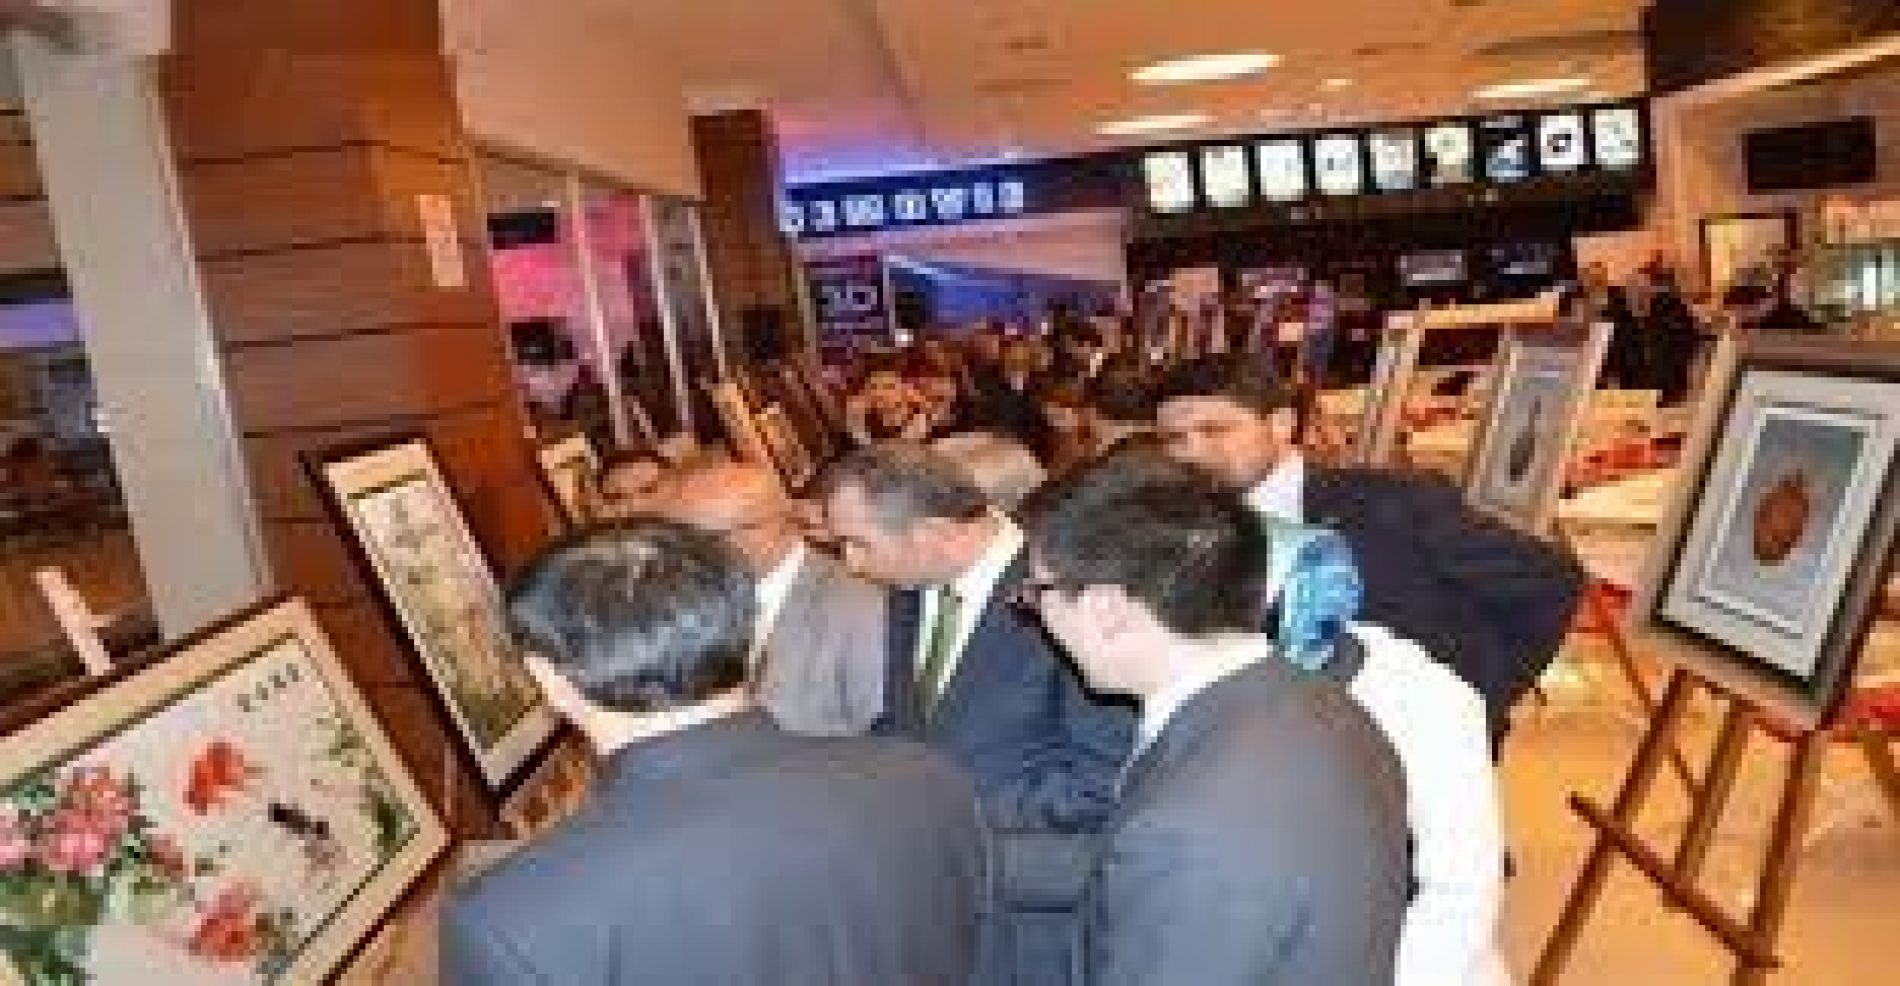 2014, CHINESE SILK EXHIBITION OPENED IN AFYON